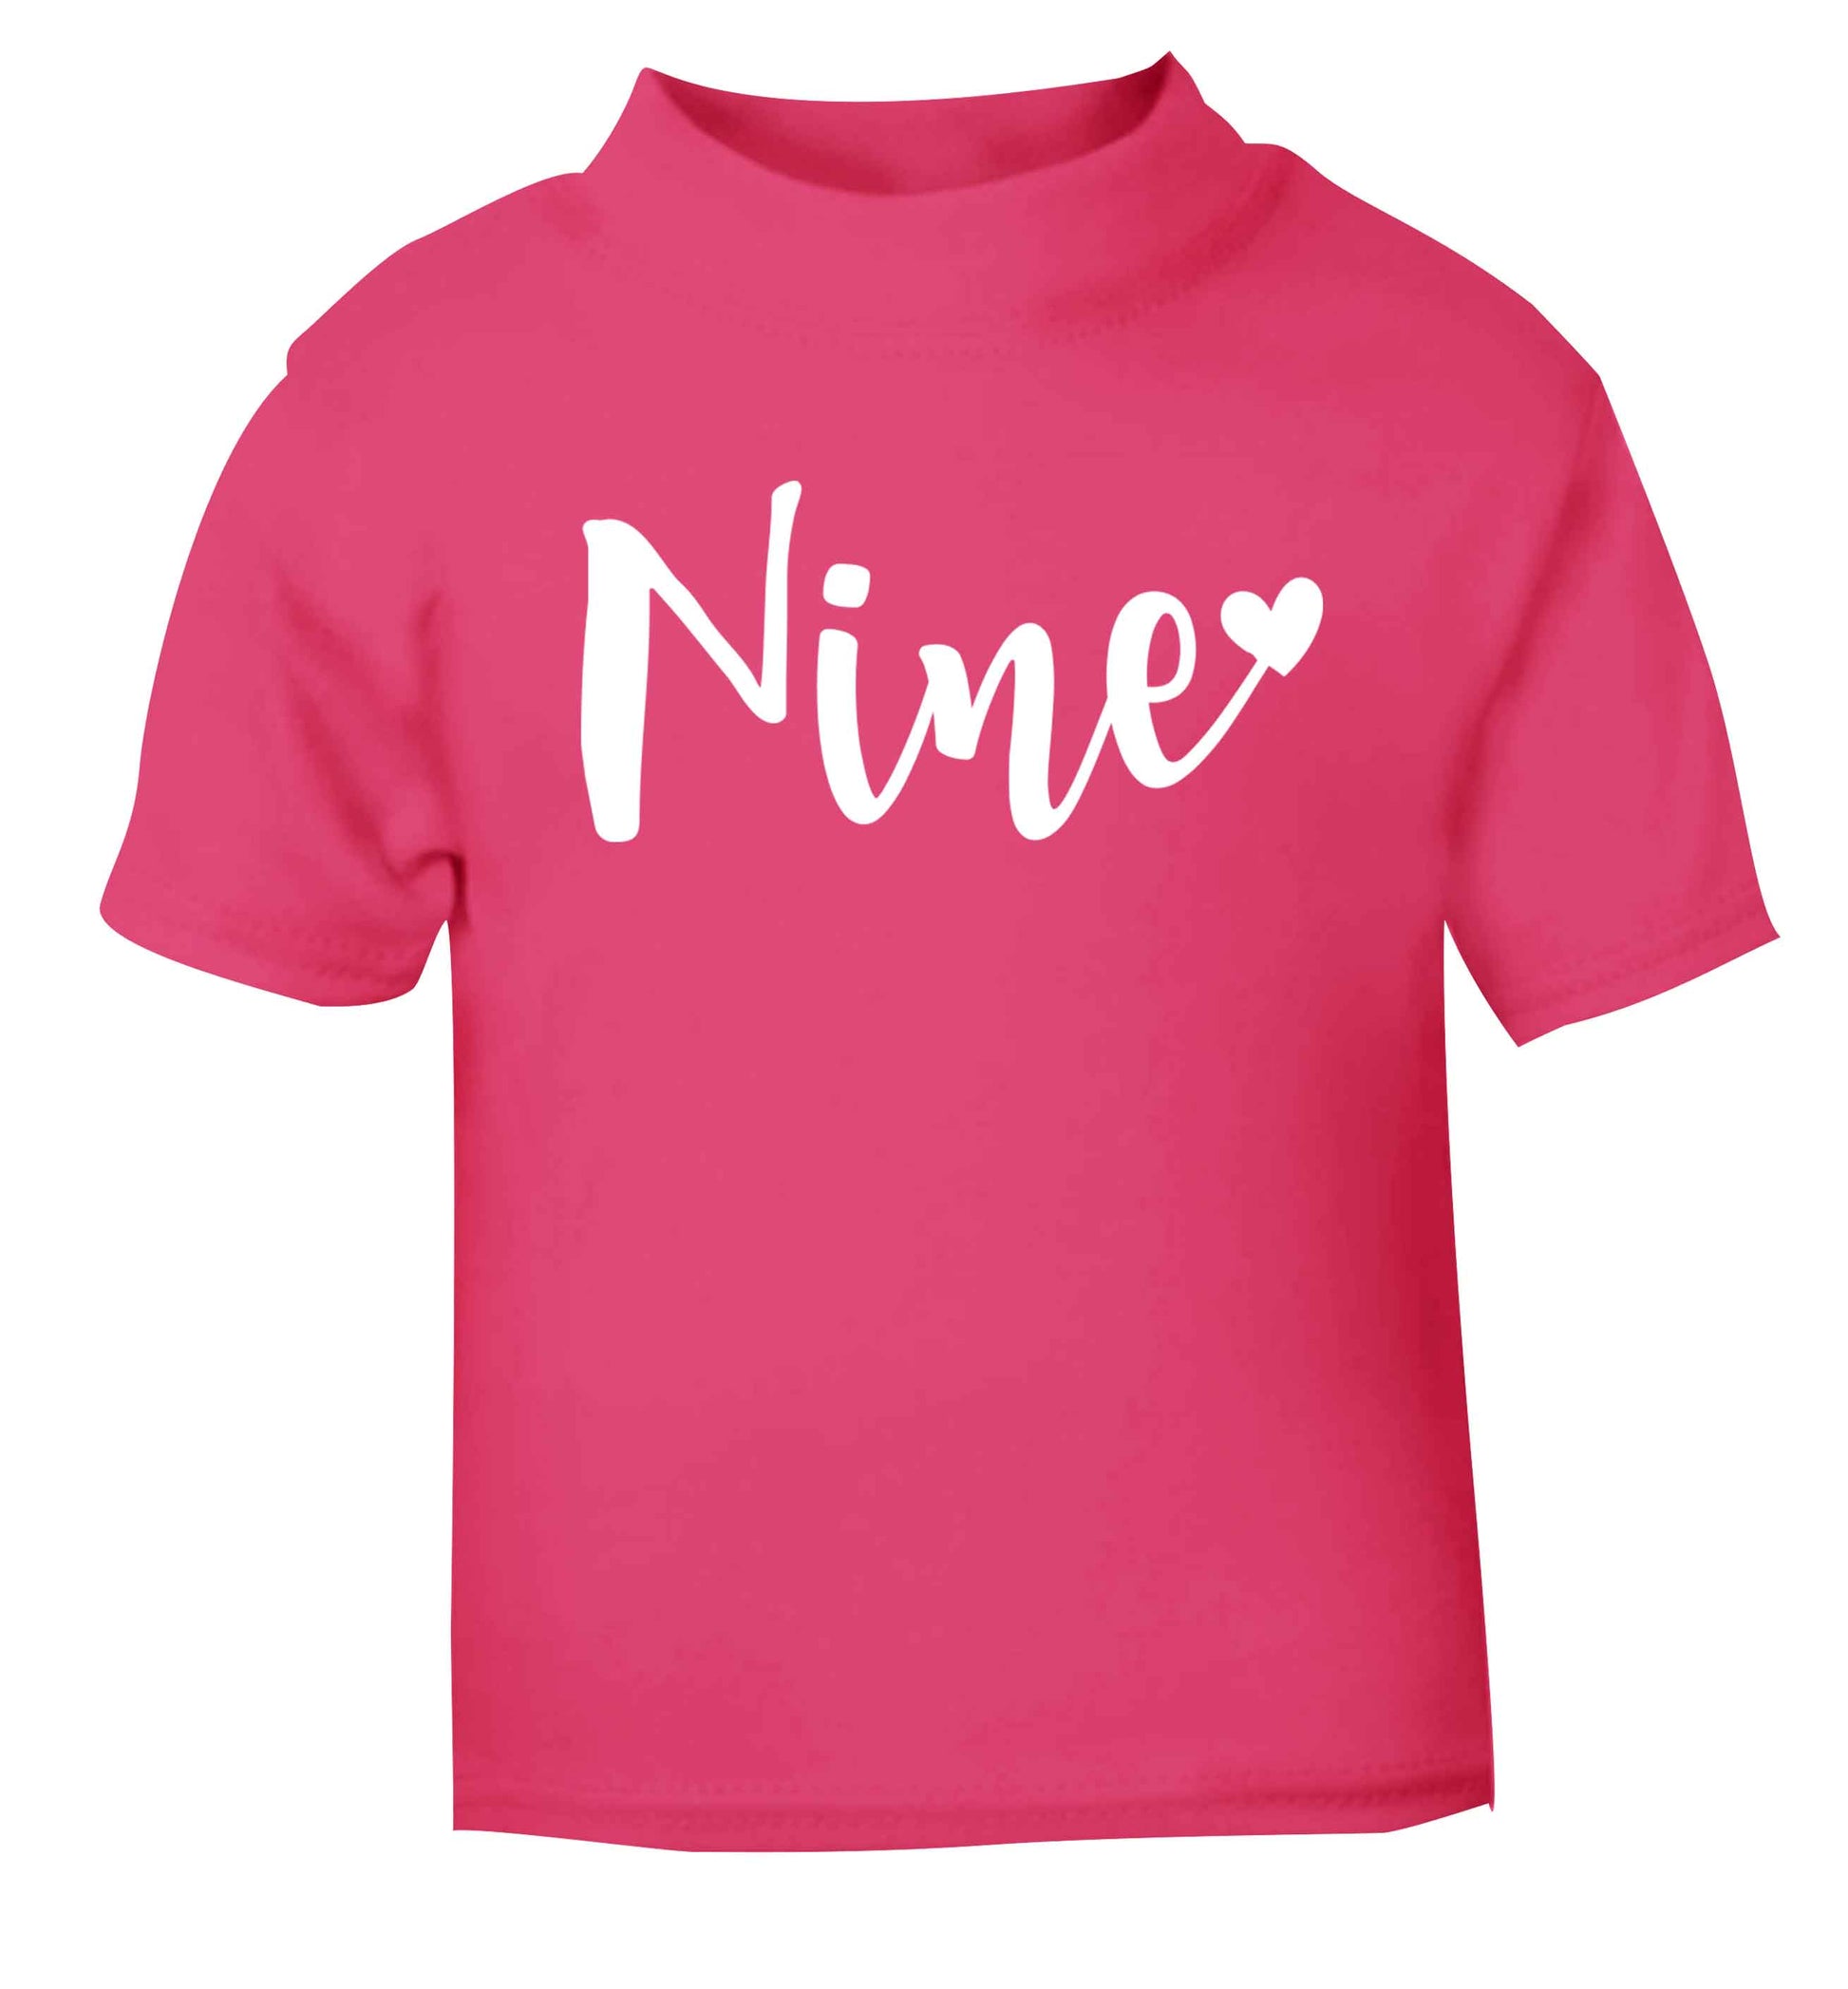 Nine and heart pink baby toddler Tshirt 2 Years